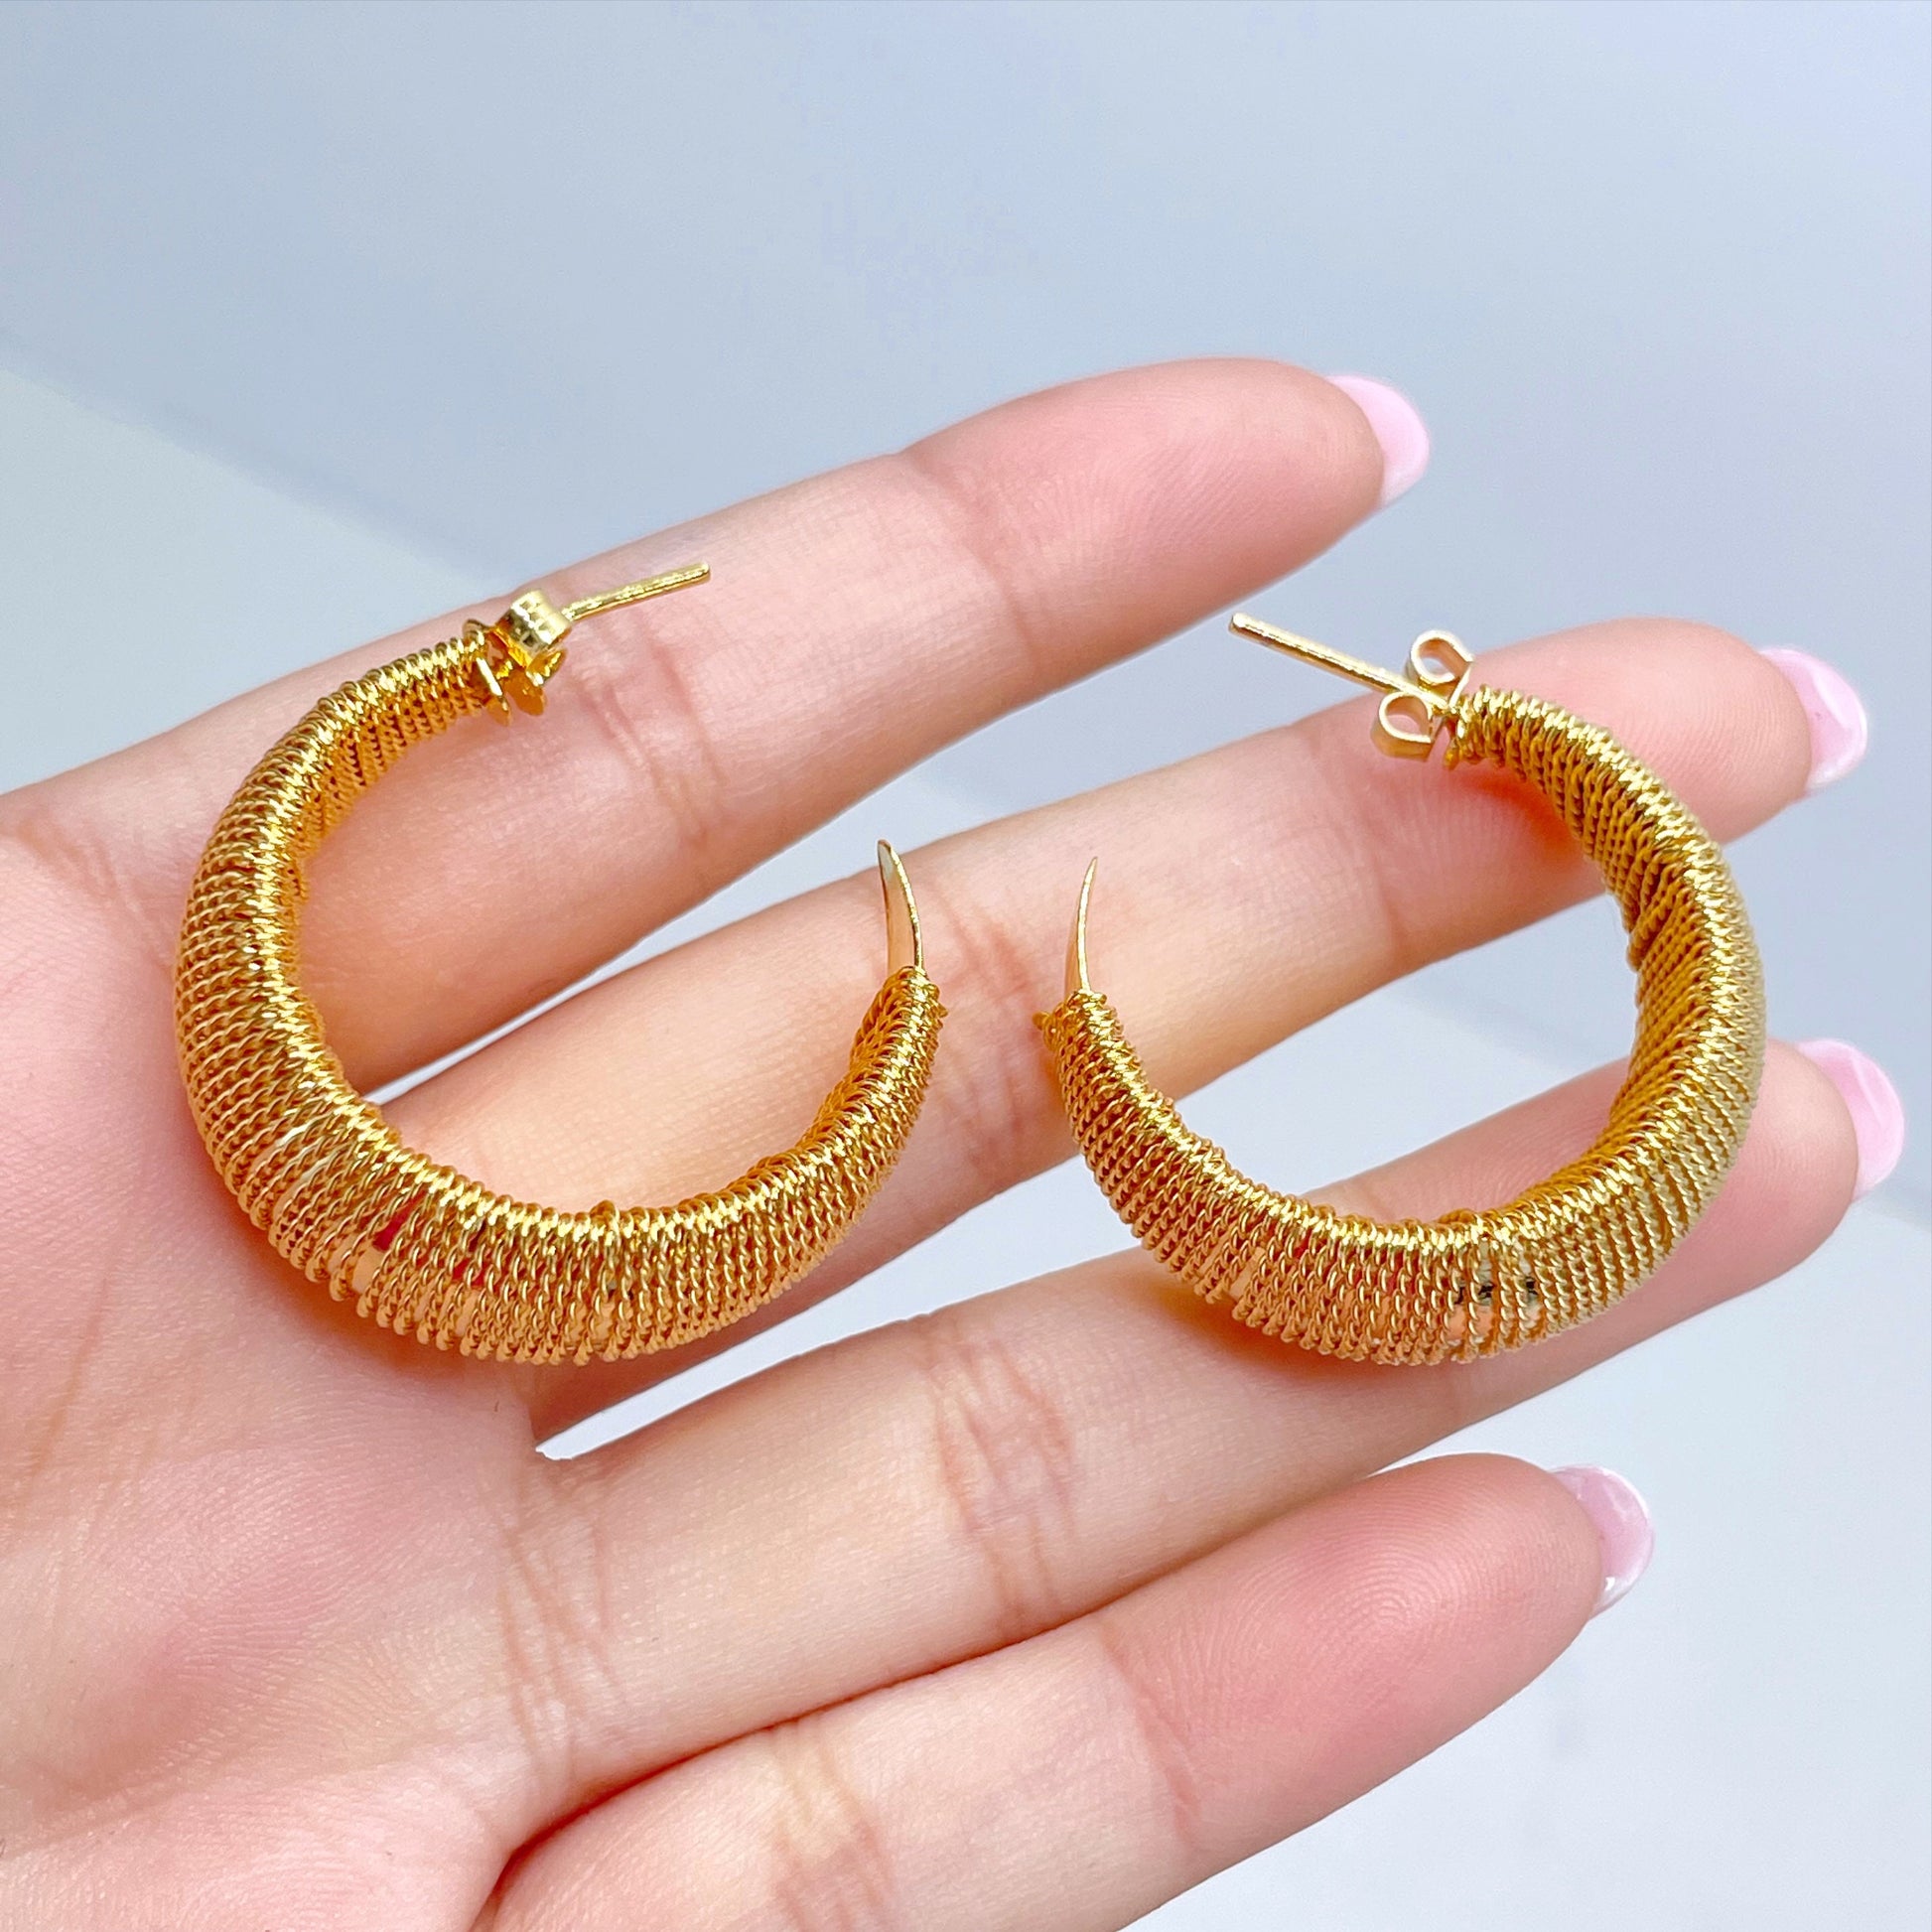 18k Gold Filled  31mm C-Hoop Earrings, 15mm Thickness, Wholesale Jewelry Making Supplies